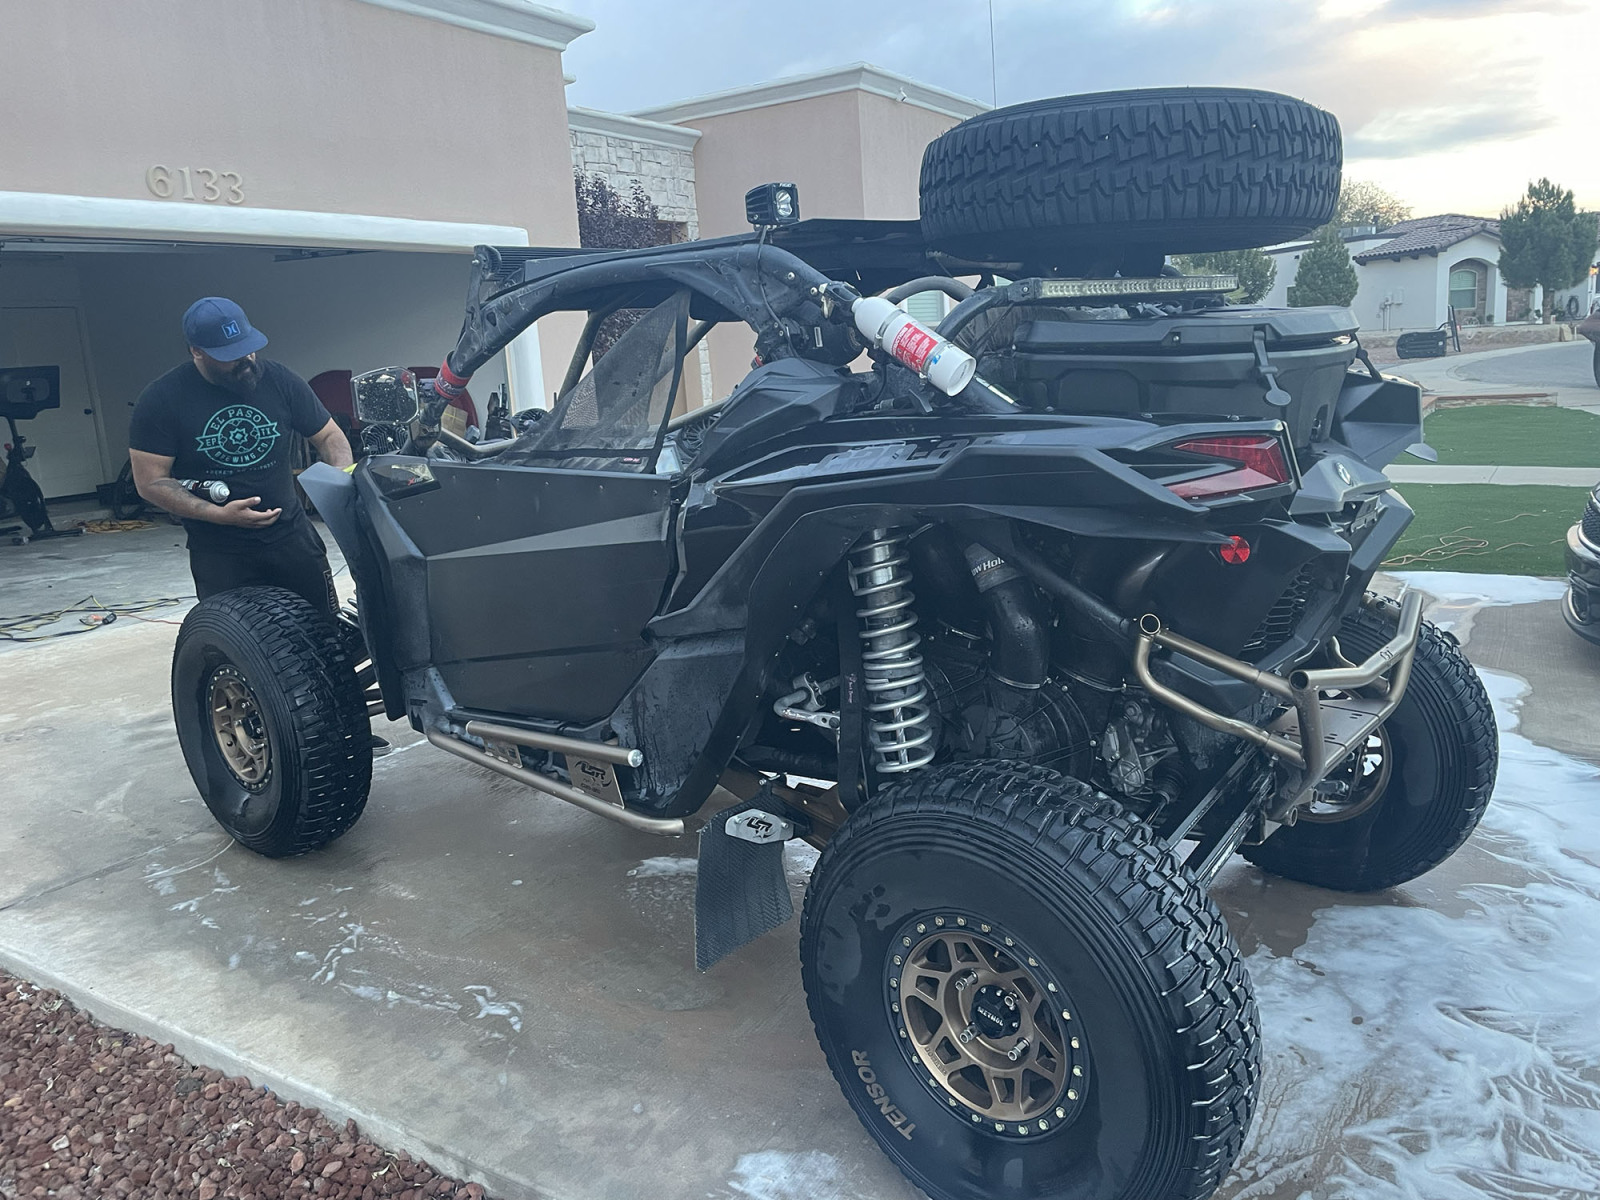 For Sale: 2019 can am maverick x3 turbo R with over 40k in upgrades - photo2